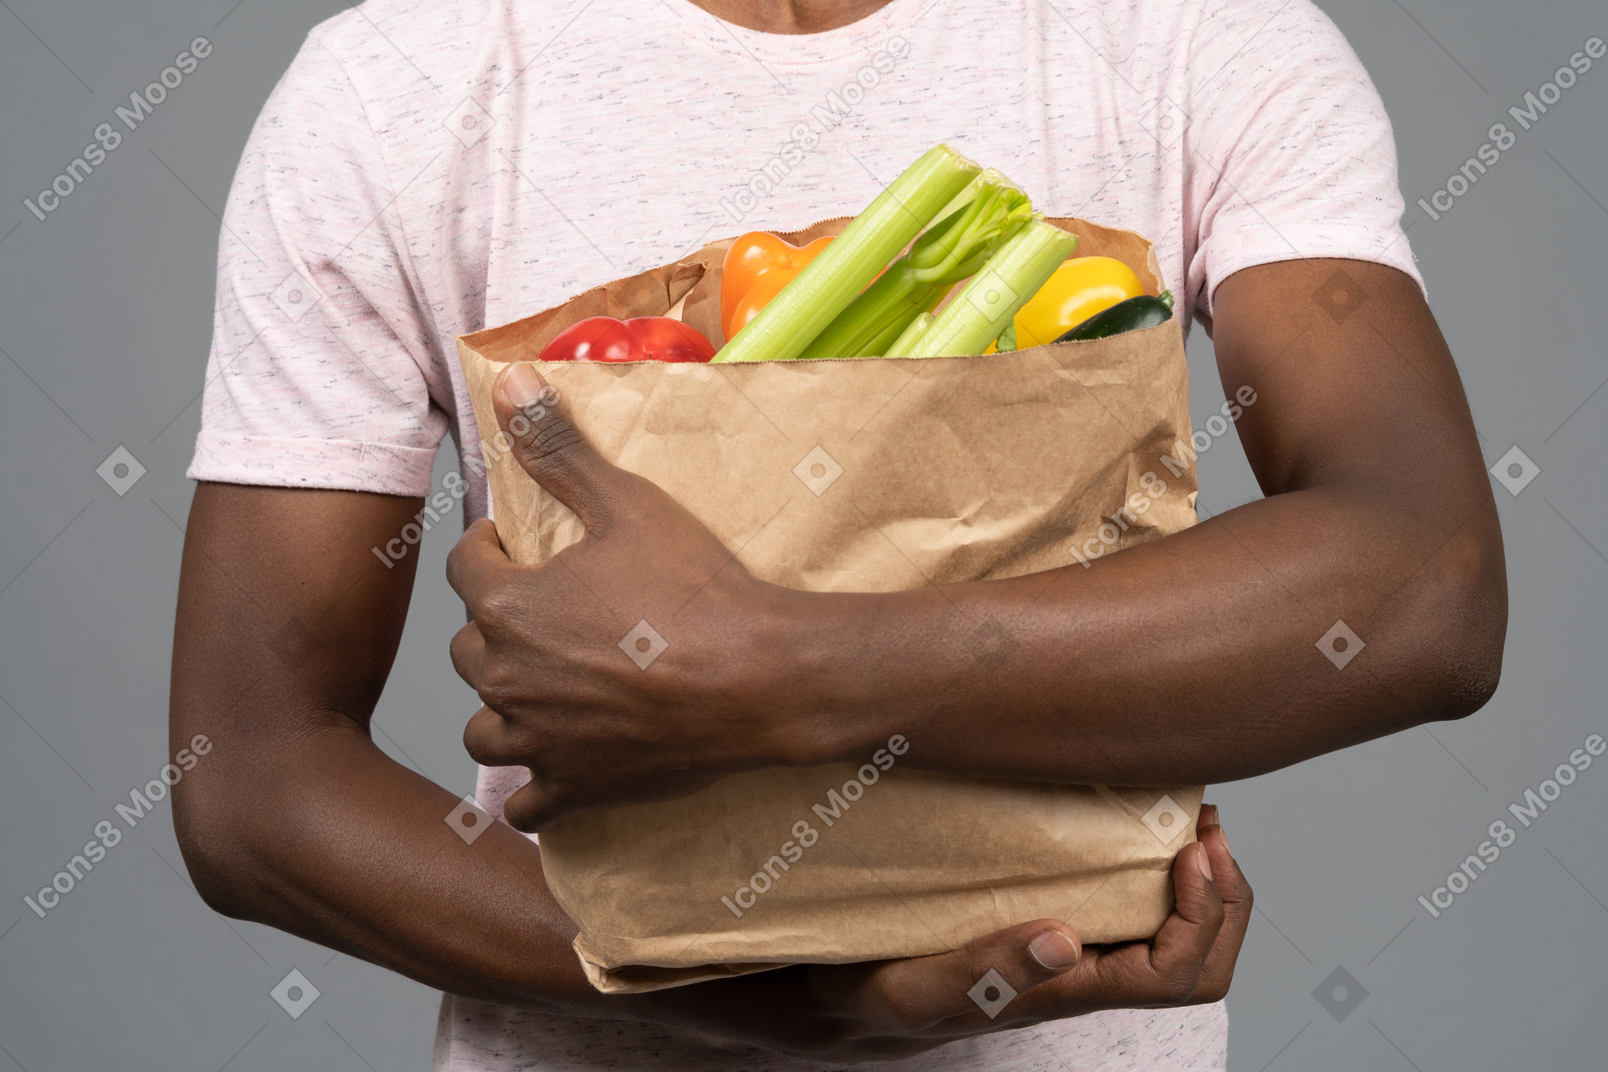 A young man holding a groceries bag